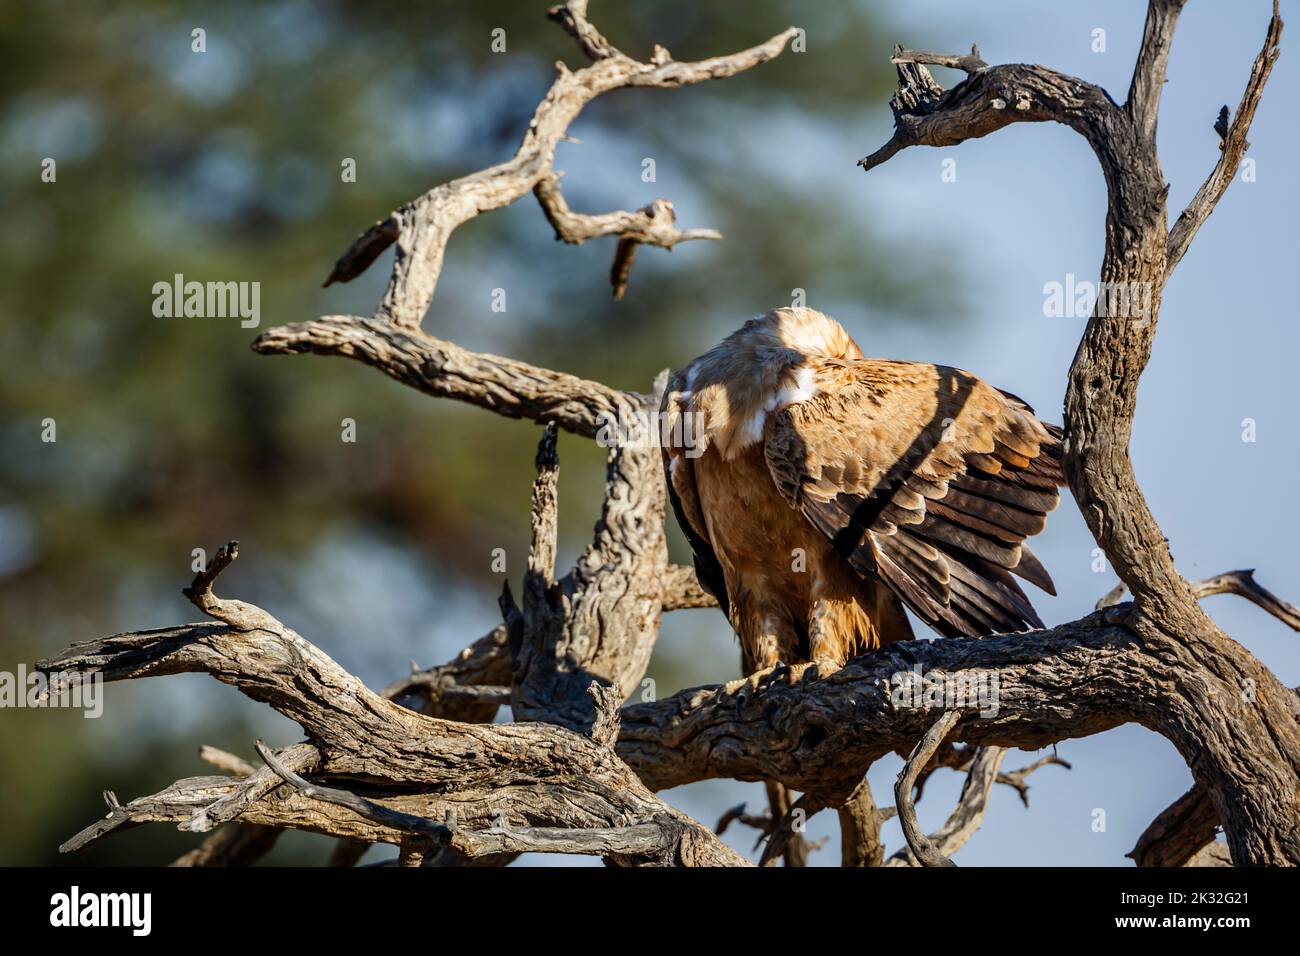 Tawny Eagle preening on a log in Kgalagadi transfrontier park, South Africa ; Specie Aquila rapax family of Accipitridae Stock Photo